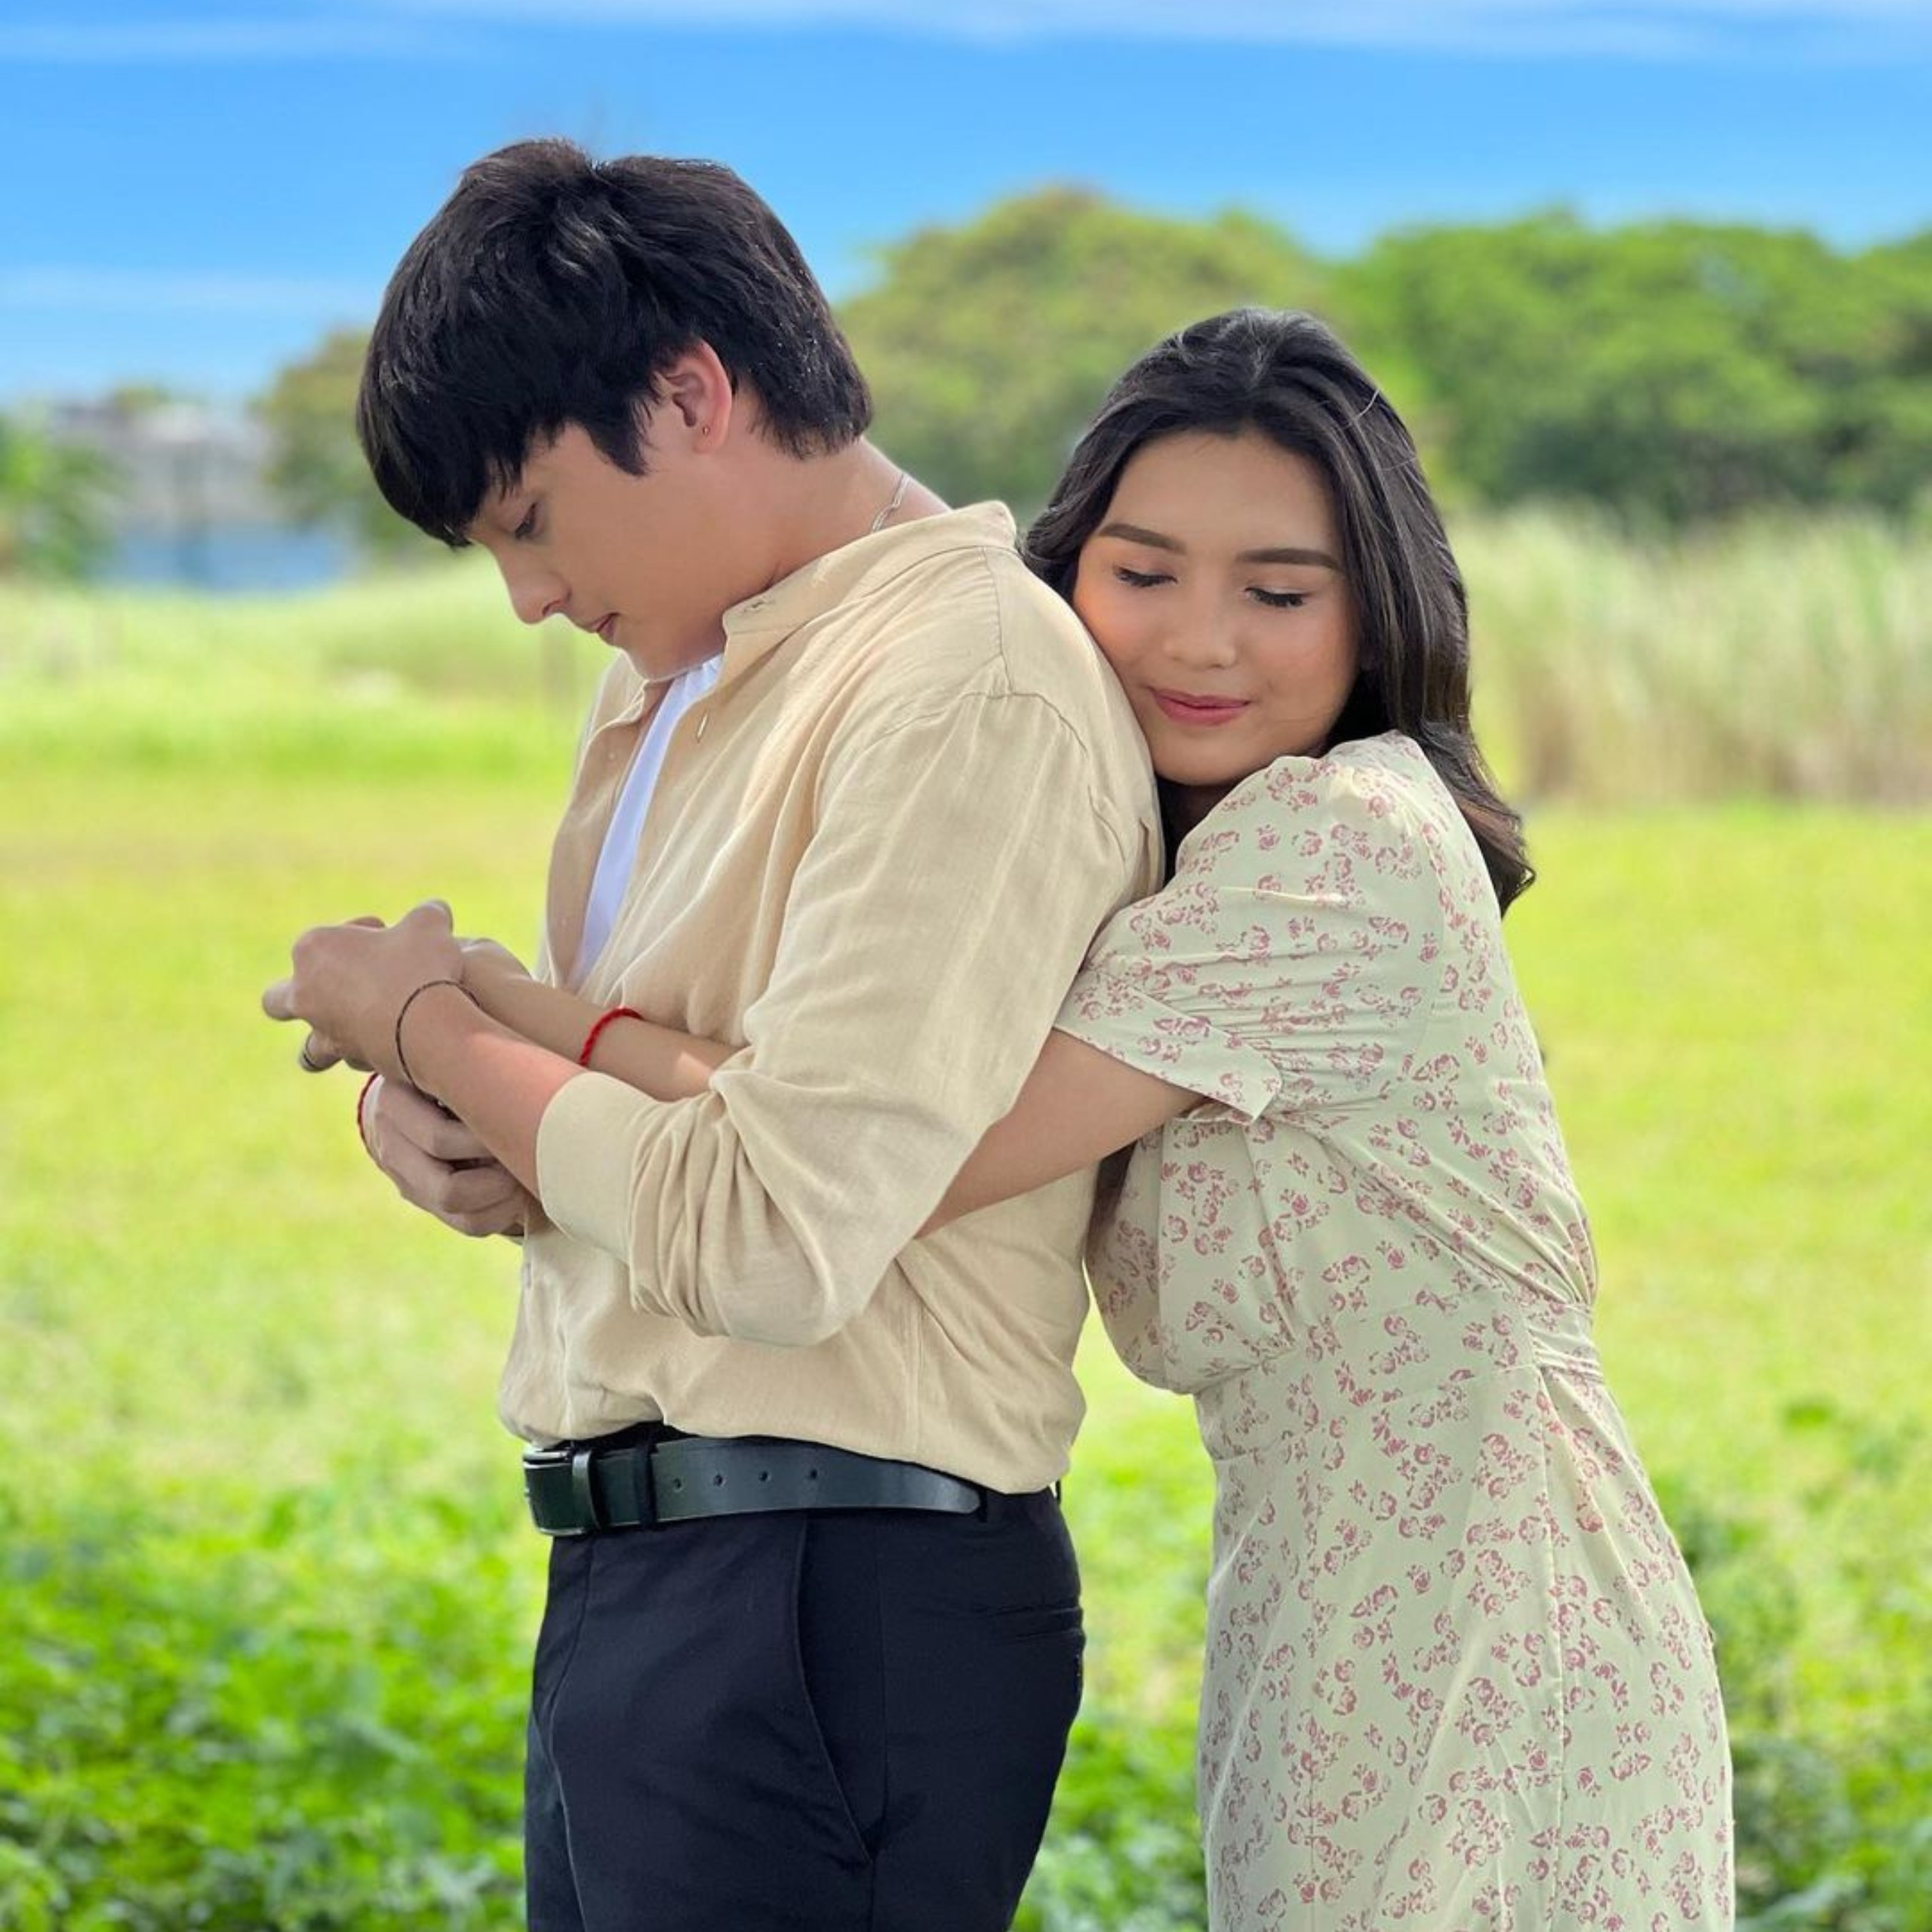 Francine Diaz and Seth Fedelin Star in Their First TV Series, ‘Dirty Linen’